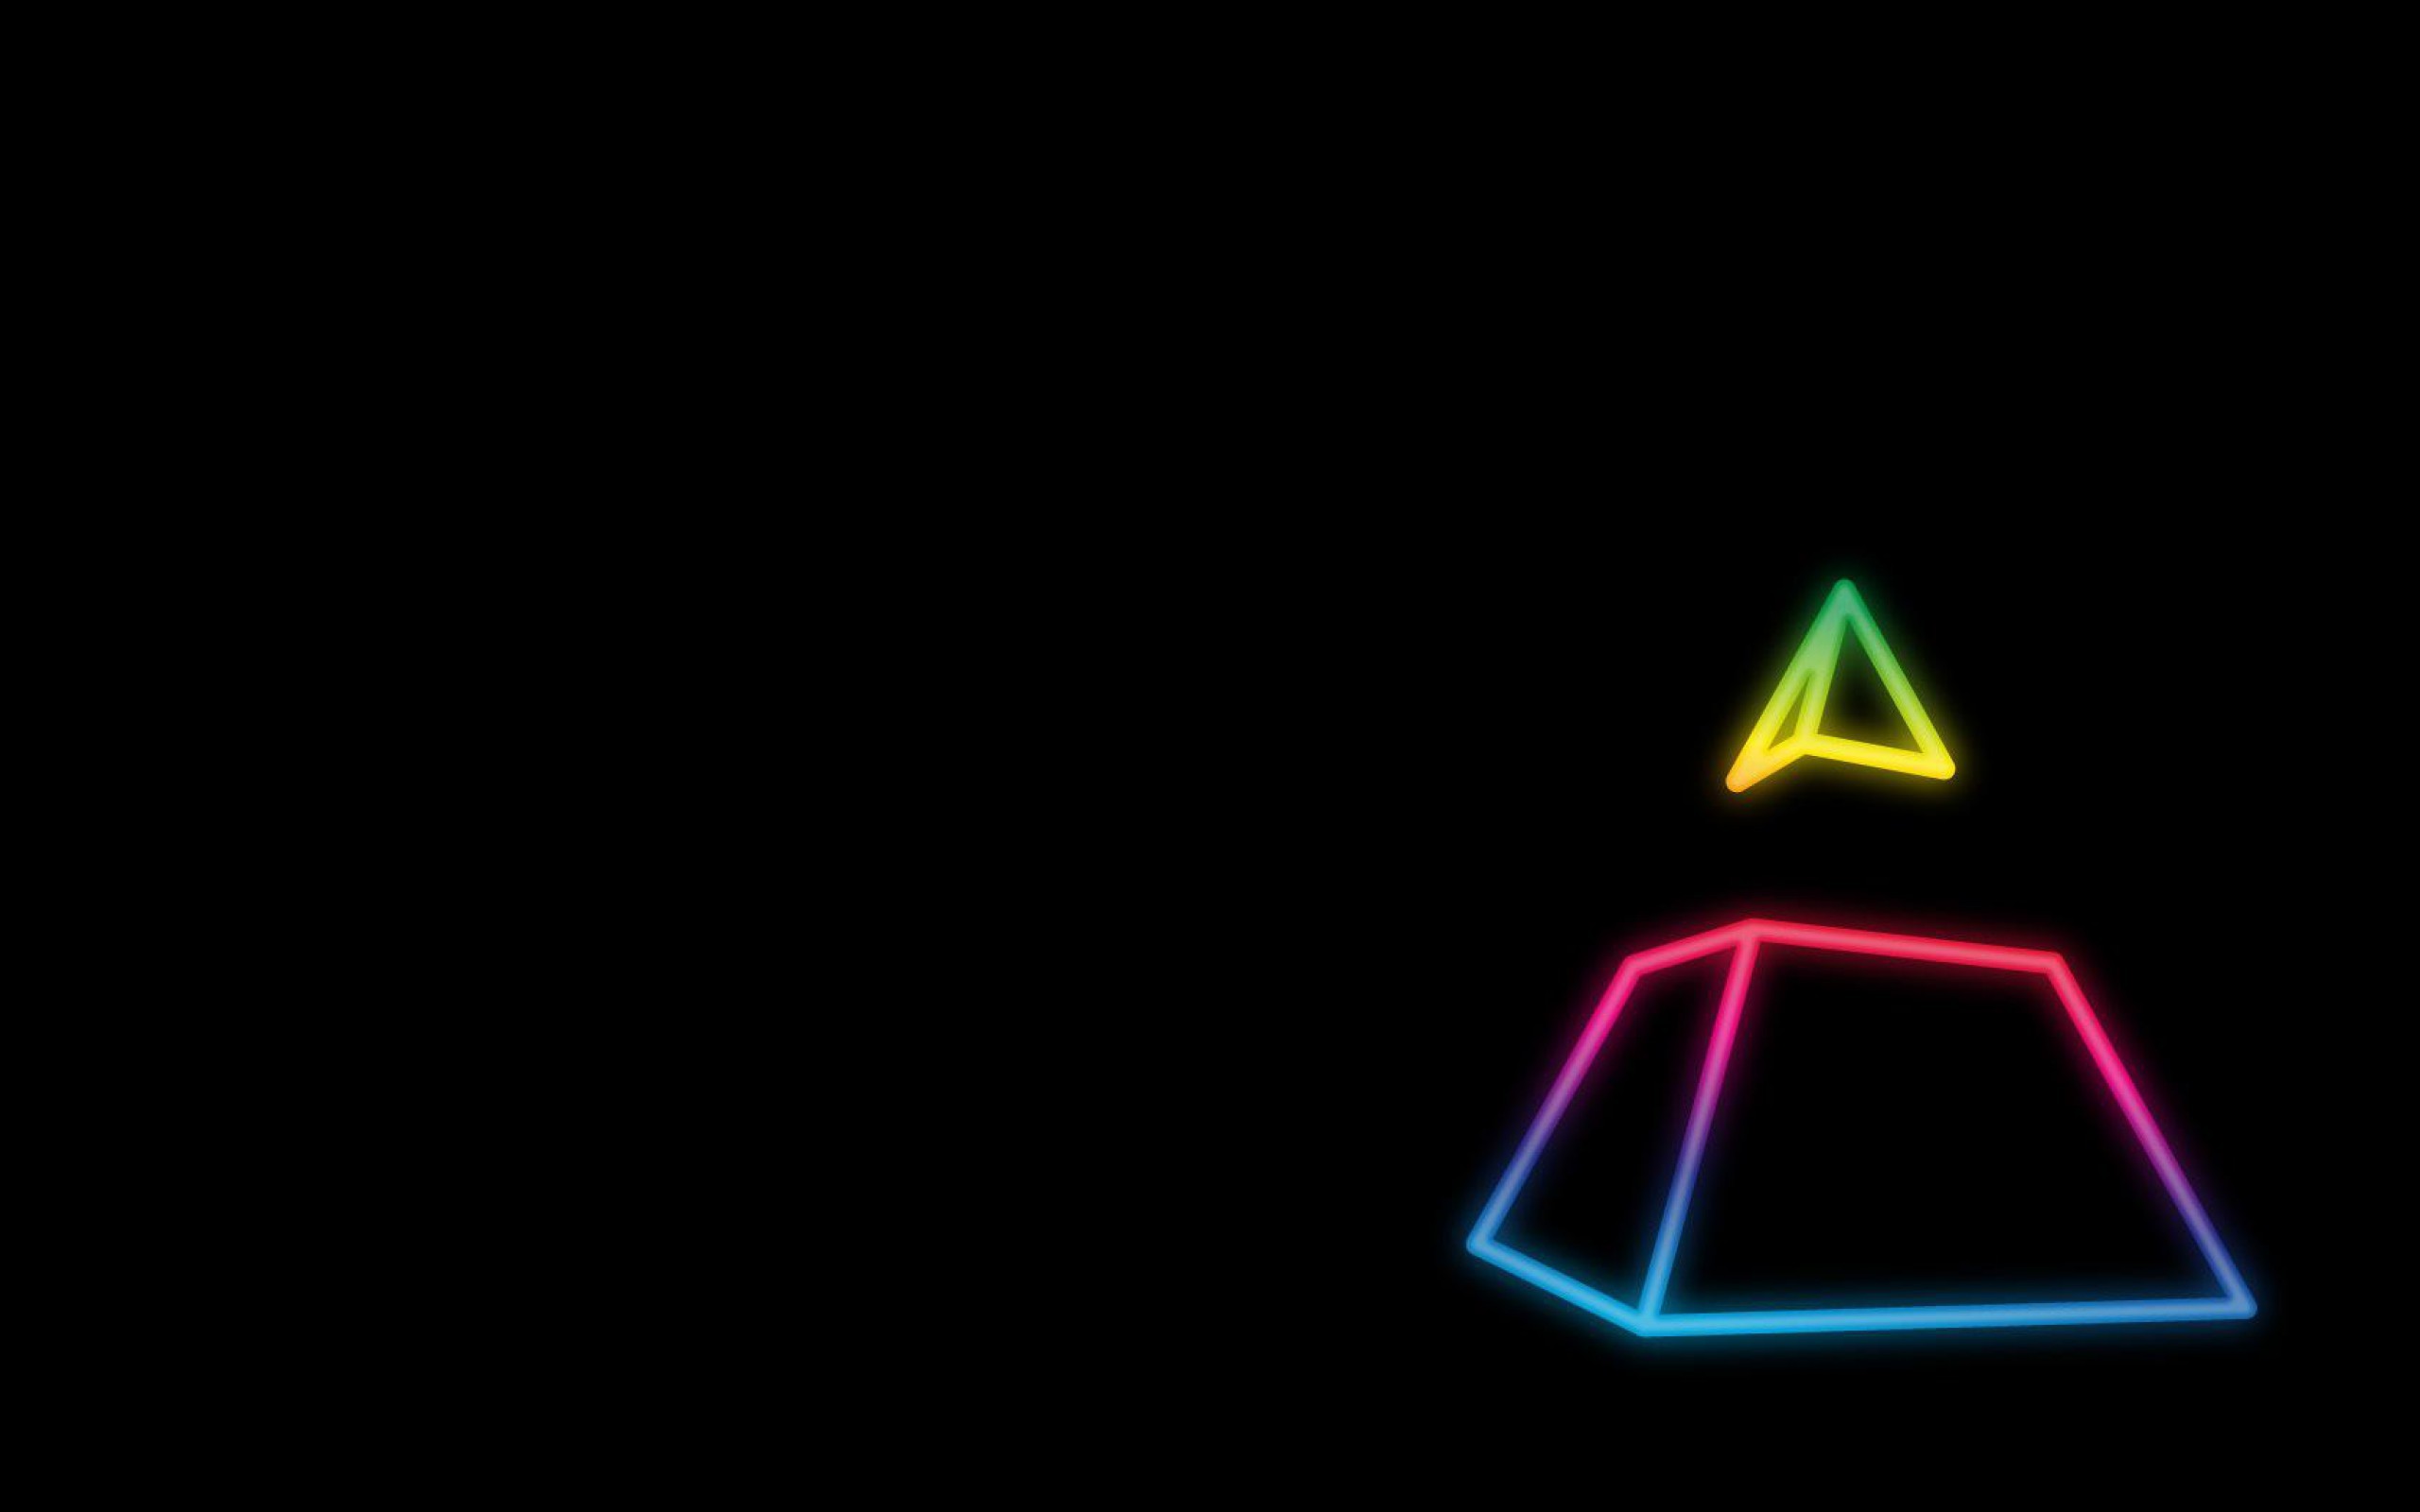 Daft Punk Wallpapers High Quality Download Free | HD Wallpapers | Pinterest  | Daft punk, Hd wallpaper and Wallpaper